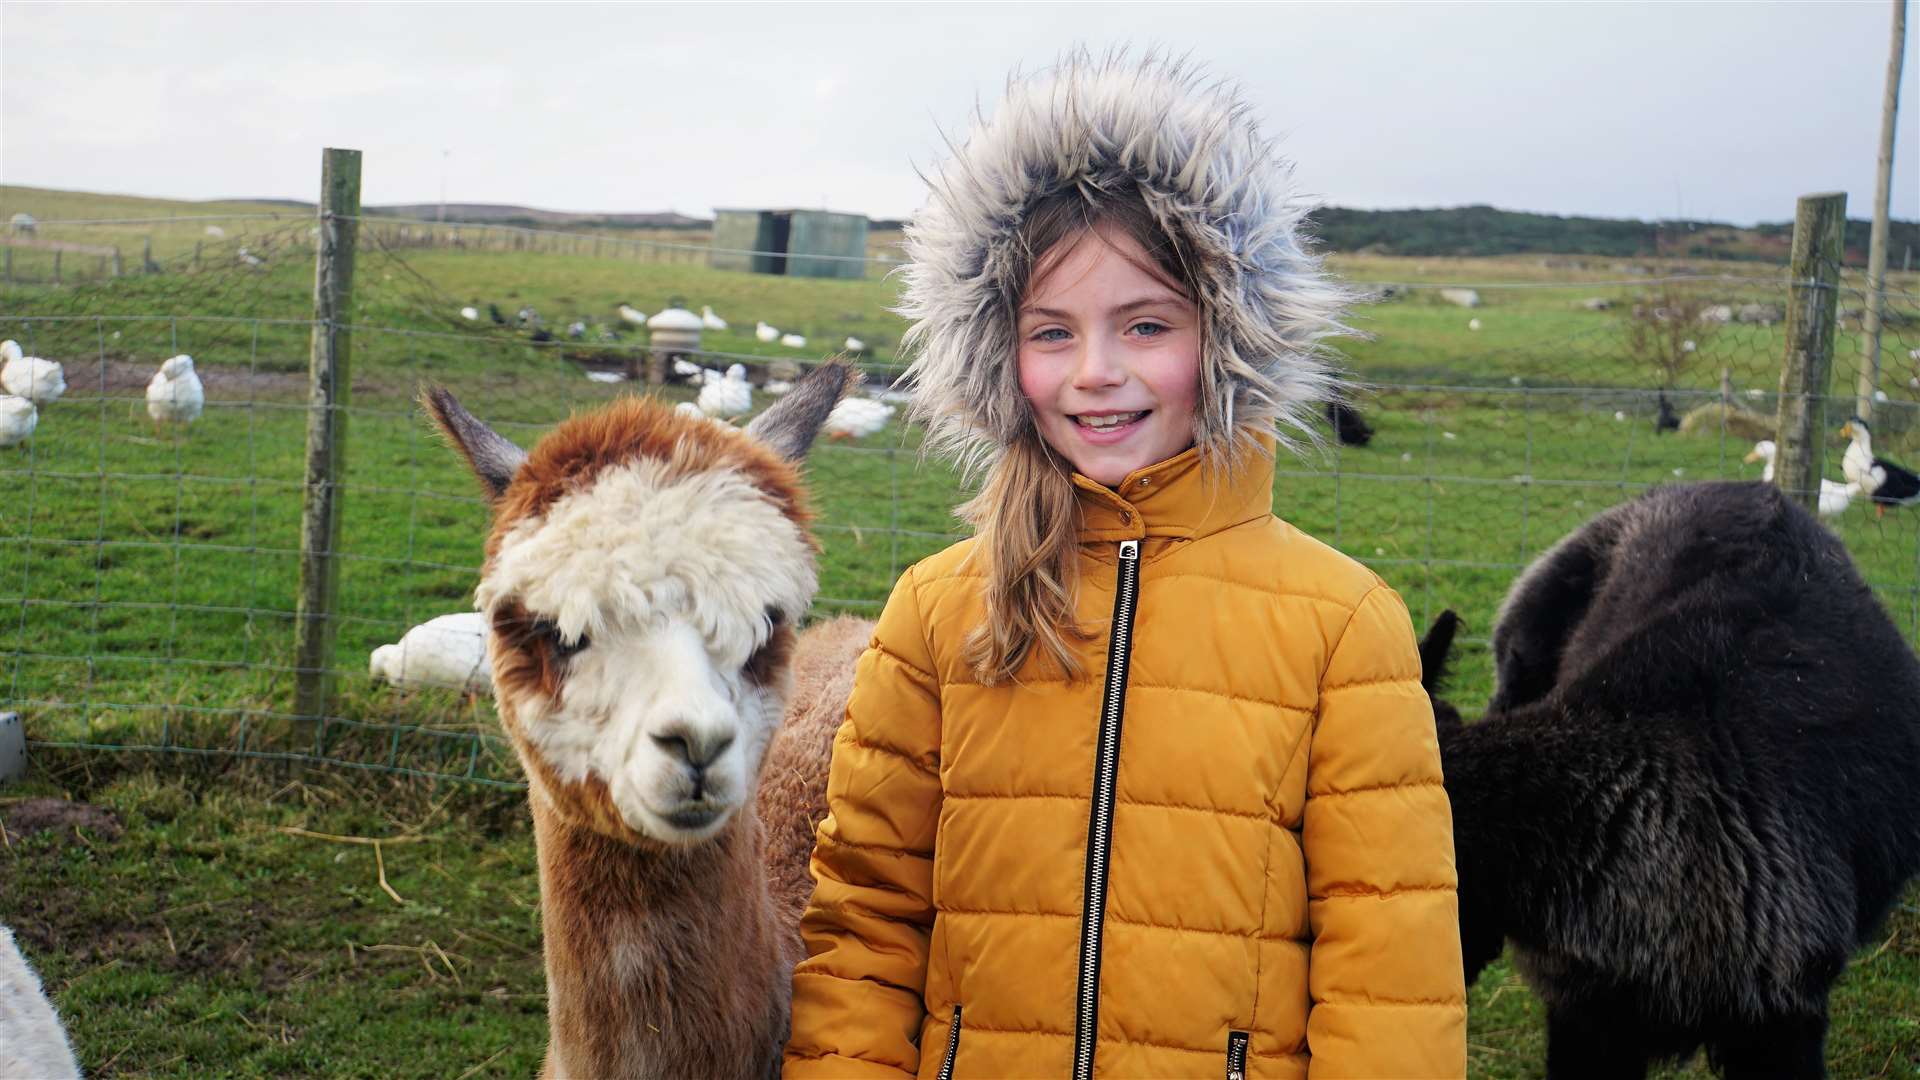 Rhea Taylor was delighted to lead Barnaby the alpaca on a tour around the farm.